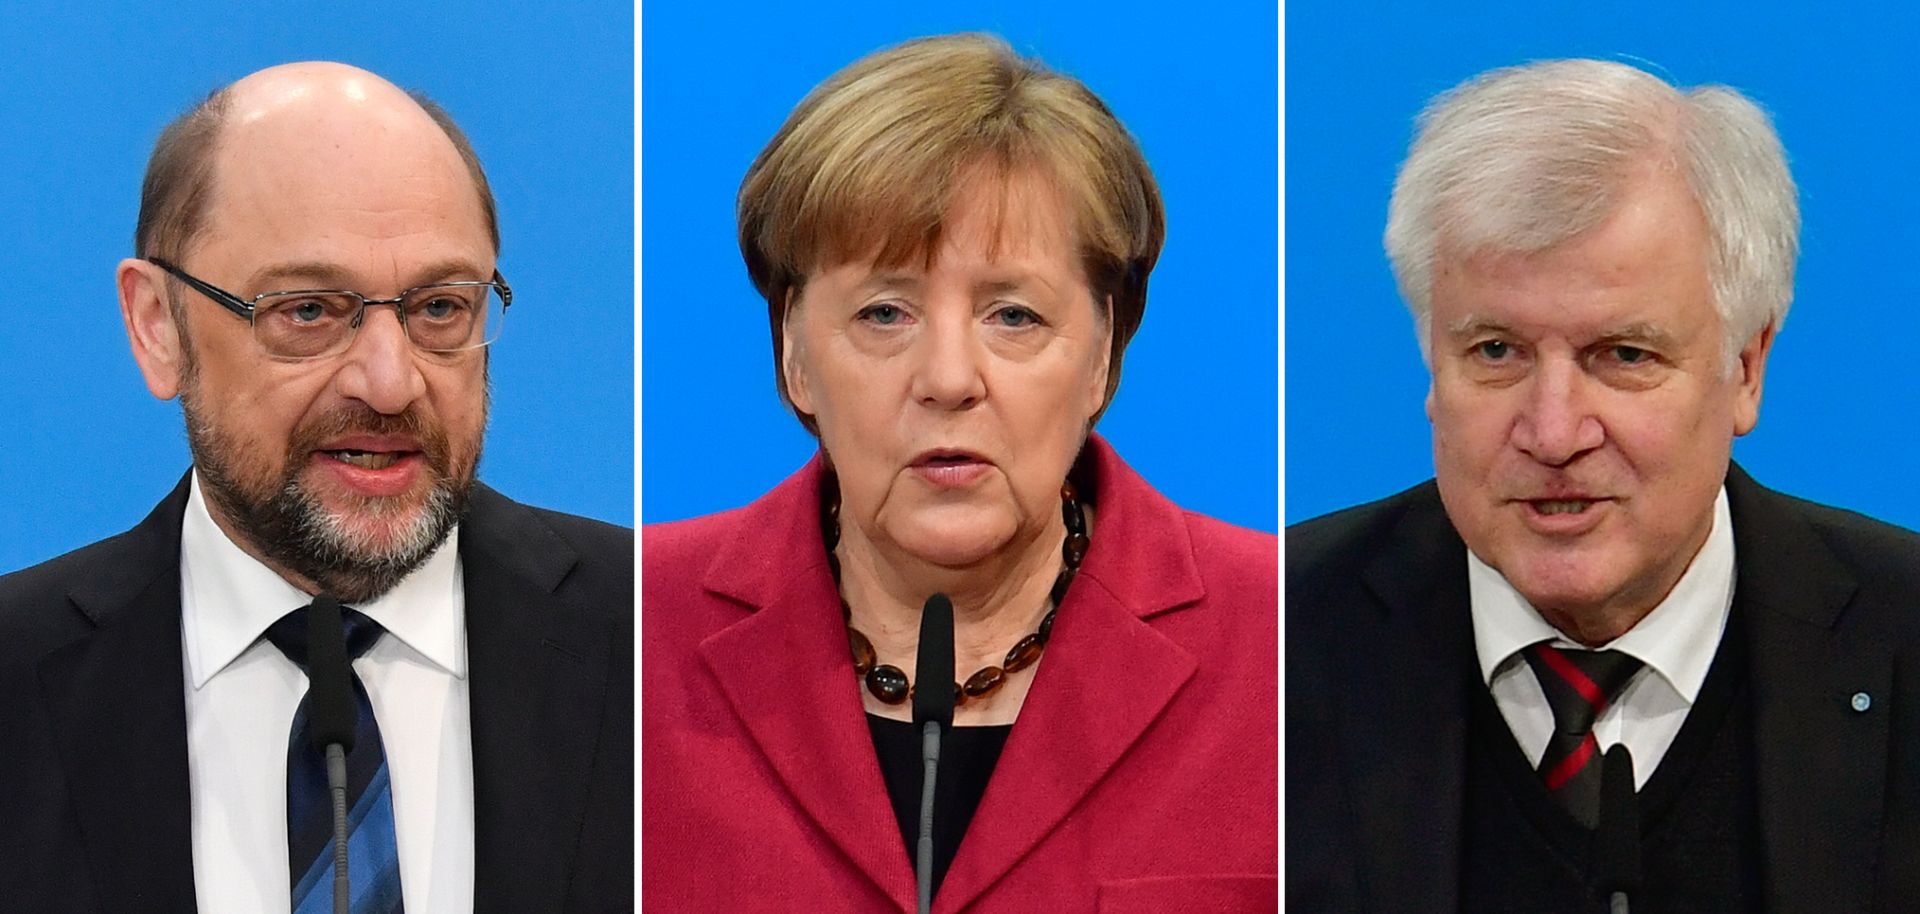 Germany's Social Democratic Party leader Martin Schulz, left; Chancellor Angela Merkel, who leads the conservative Christian Democratic Union; and Horst Seehofer, leader of the CDU's sister party, the Christian Social Union.